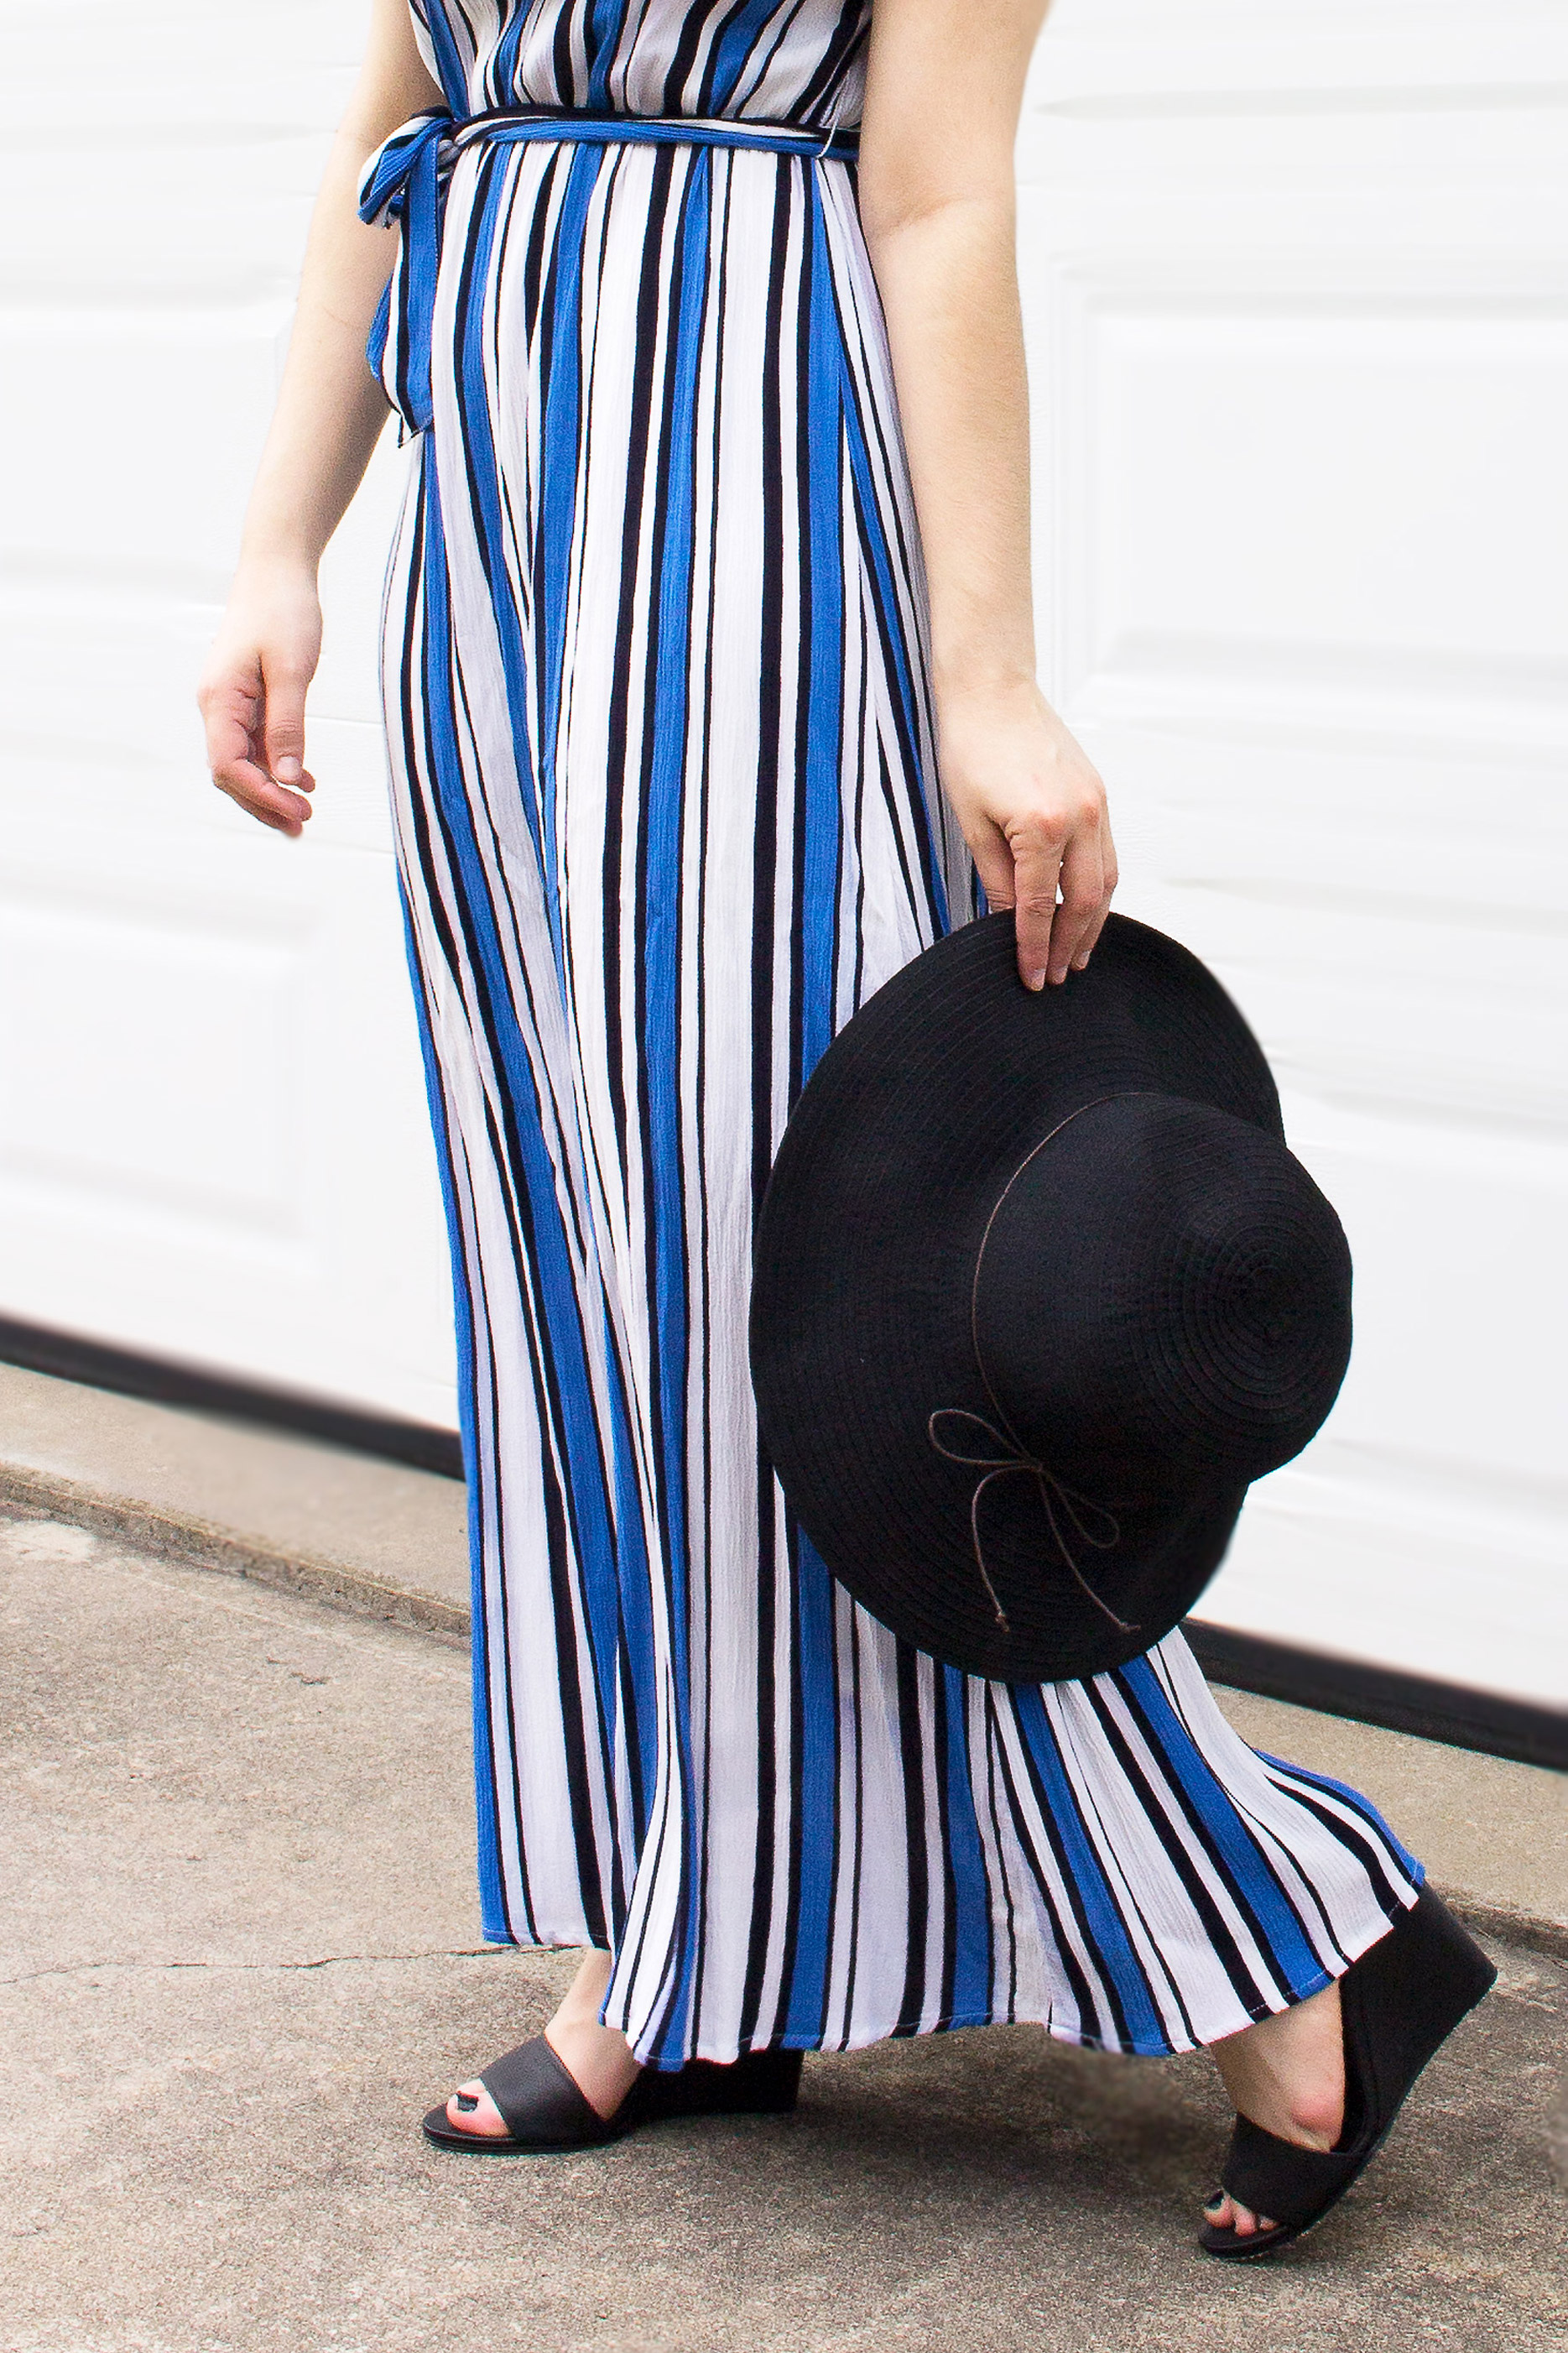 My Favorite Maxi Dress for Under $25